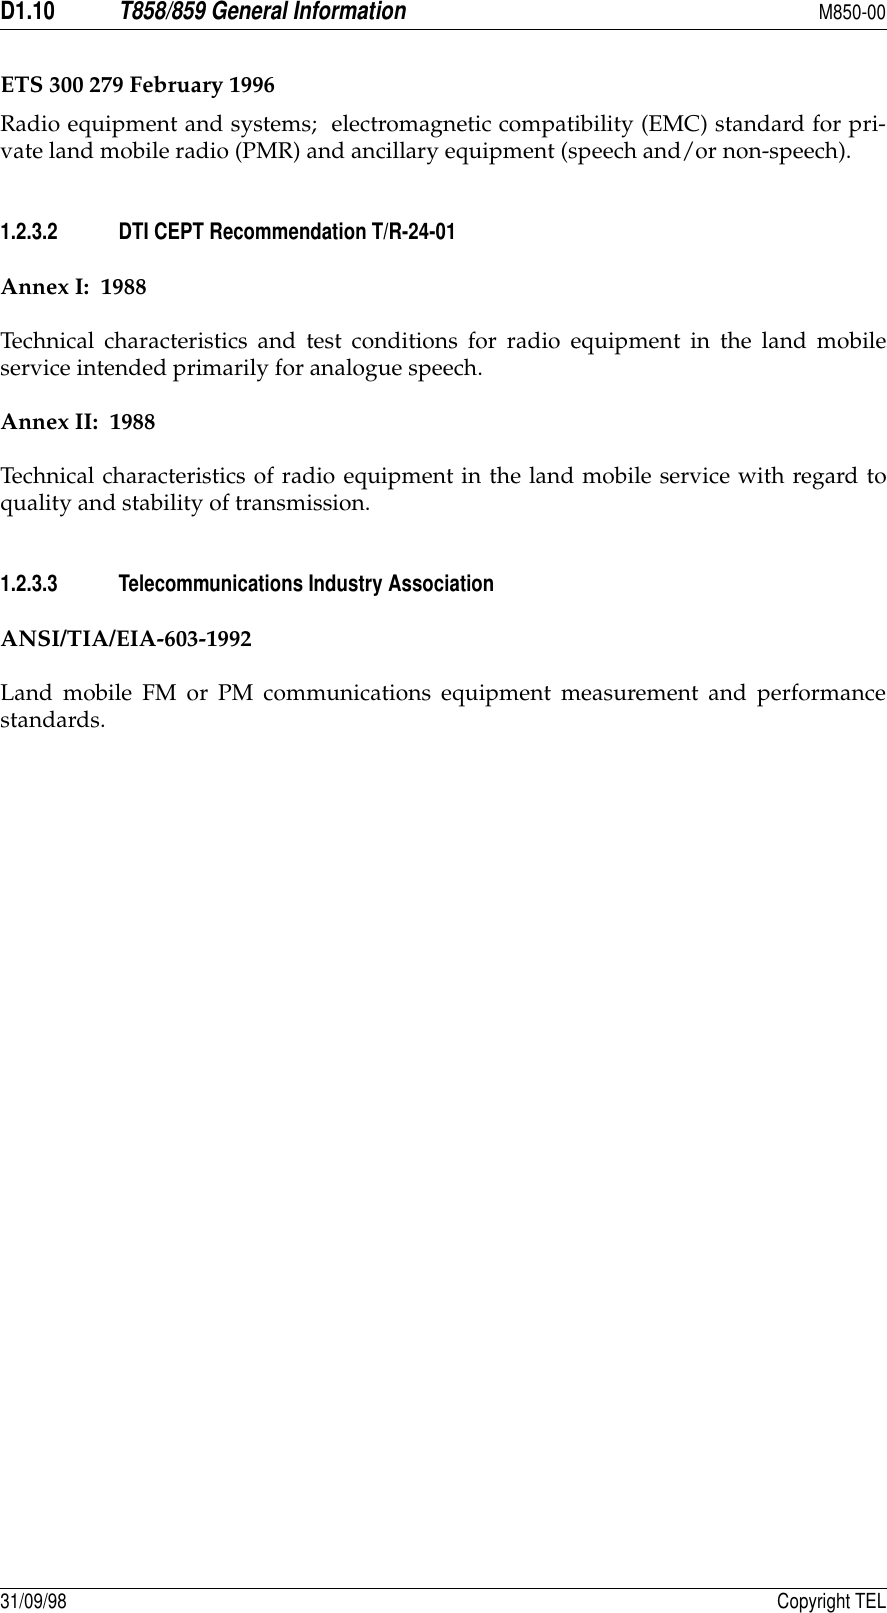 D1.10T858/859 General InformationM850-0031/09/98 Copyright TELETS 300 279 February 1996Radio equipment and systems;  electromagnetic compatibility (EMC) standard for pri-vate land mobile radio (PMR) and ancillary equipment (speech and/or non-speech).1.2.3.2 DTI CEPT Recommendation T/R-24-01Annex I:  1988Technical characteristics and test conditions for radio equipment in the land mobileservice intended primarily for analogue speech.Annex II:  1988Technical characteristics of radio equipment in the land mobile service with regard toquality and stability of transmission.1.2.3.3 Telecommunications Industry AssociationANSI/TIA/EIA-603-1992Land mobile FM or PM communications equipment measurement and performancestandards.